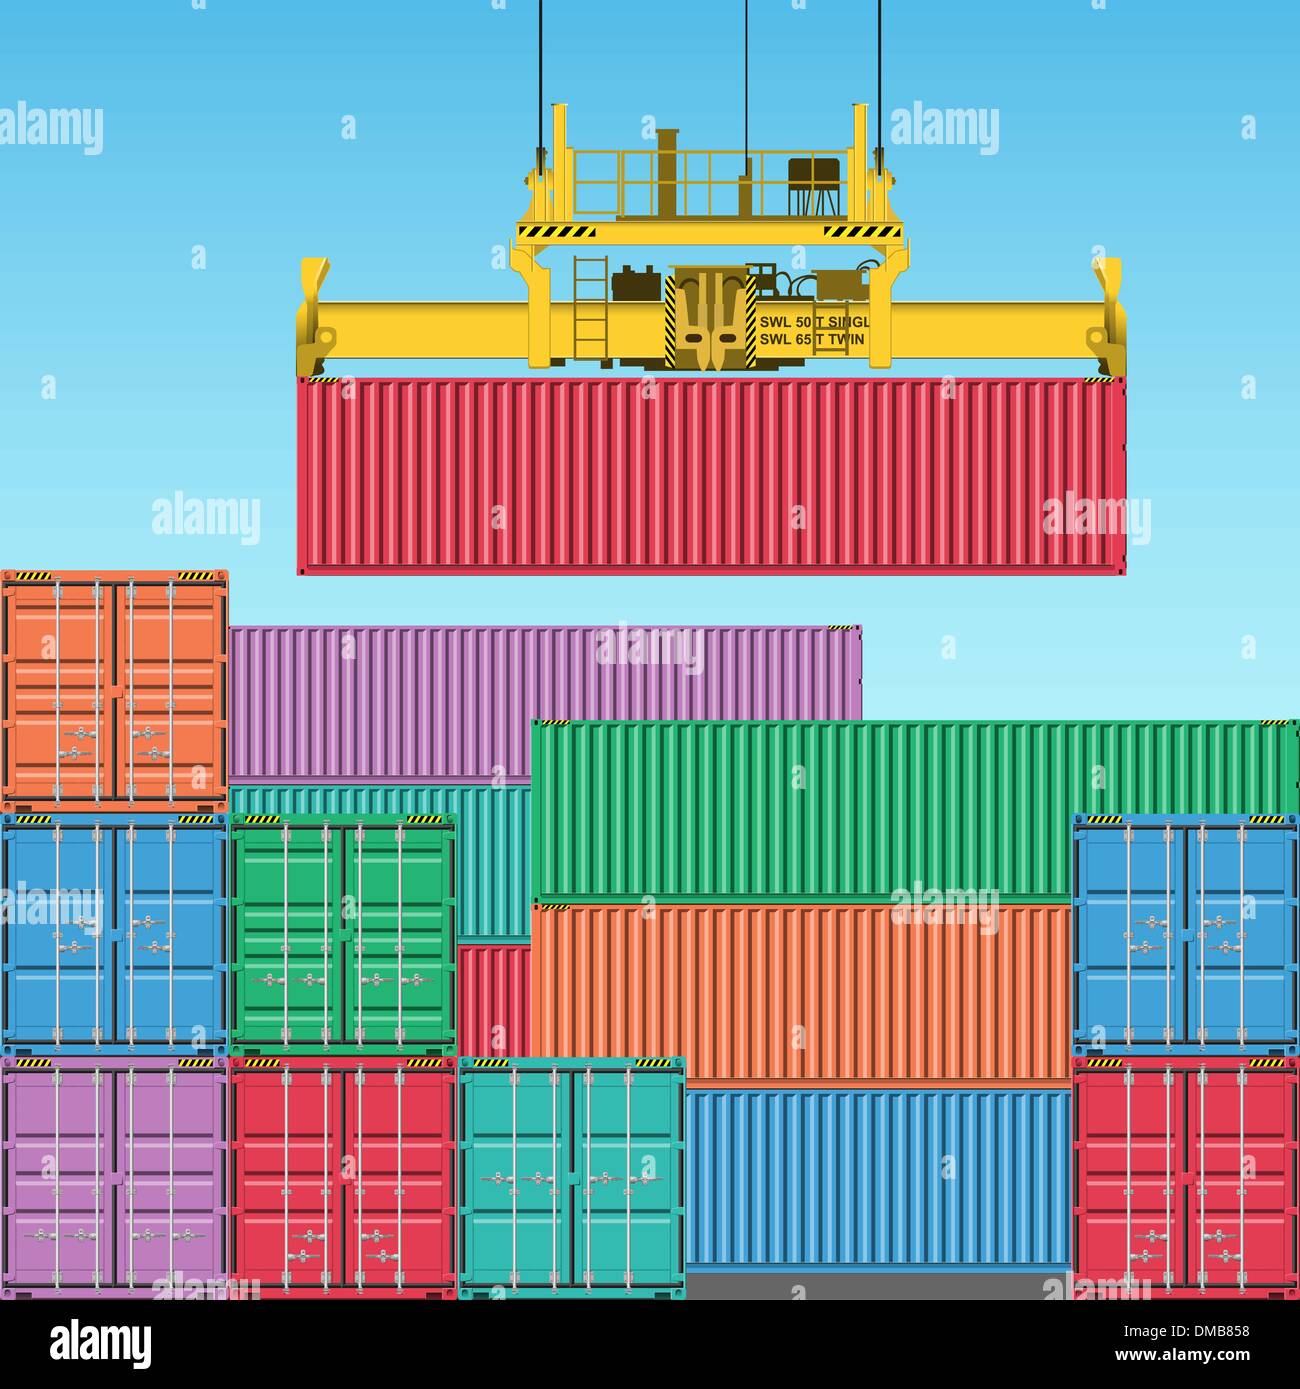 Freight Containers Stock Vector